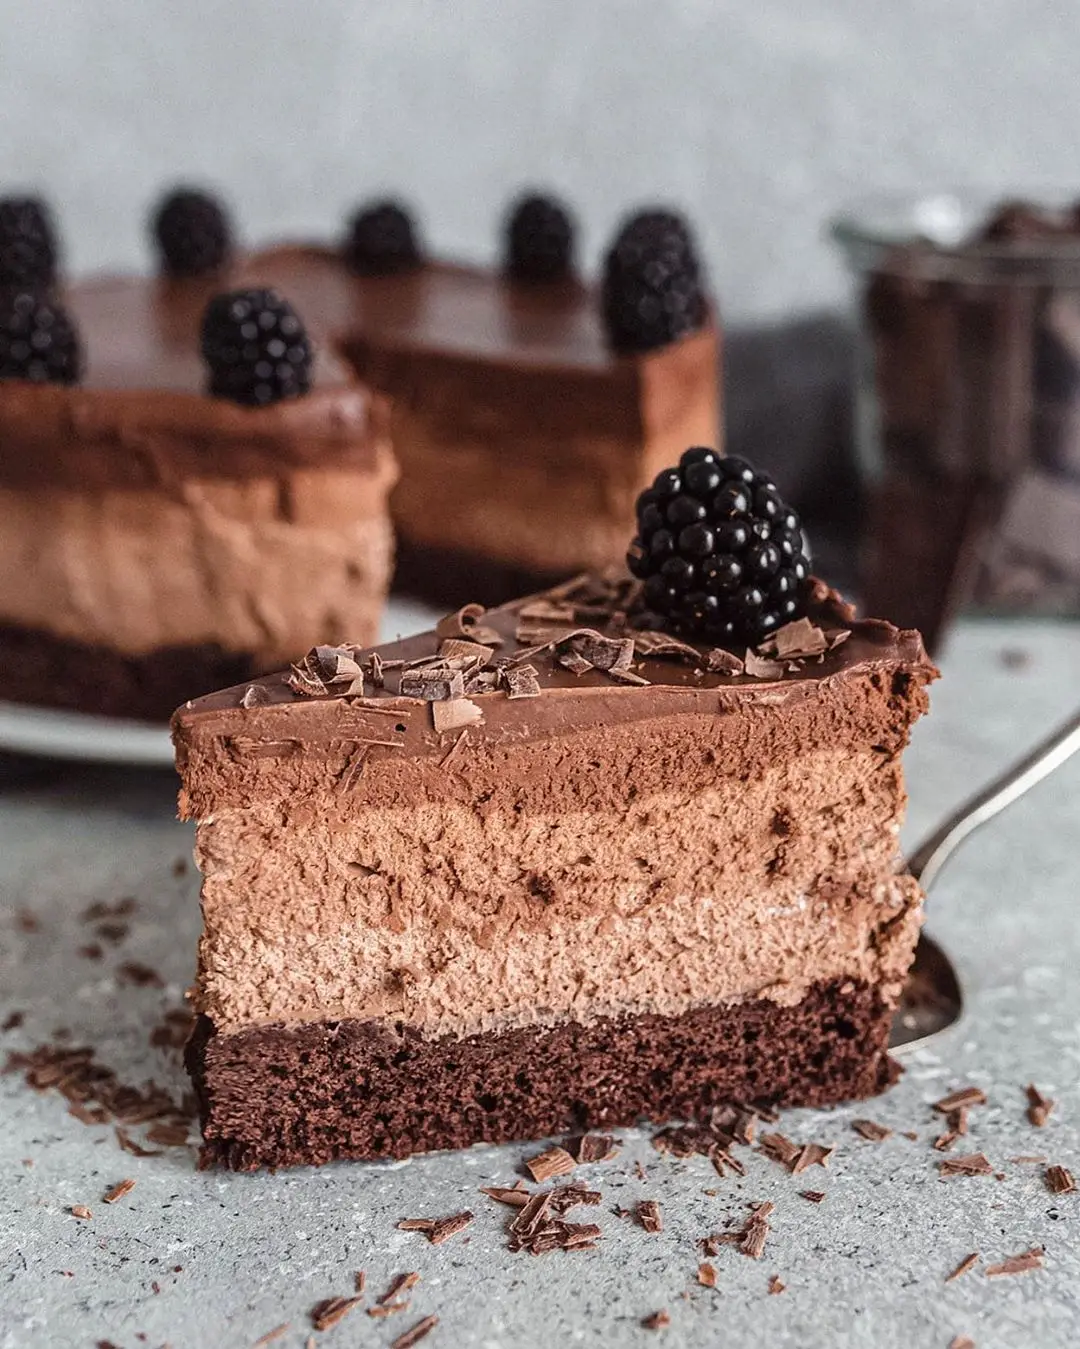 19 of Todays Most Mouthwatering Cake and Dessert Inspo for All the Women Who Love Eating Sweets ...